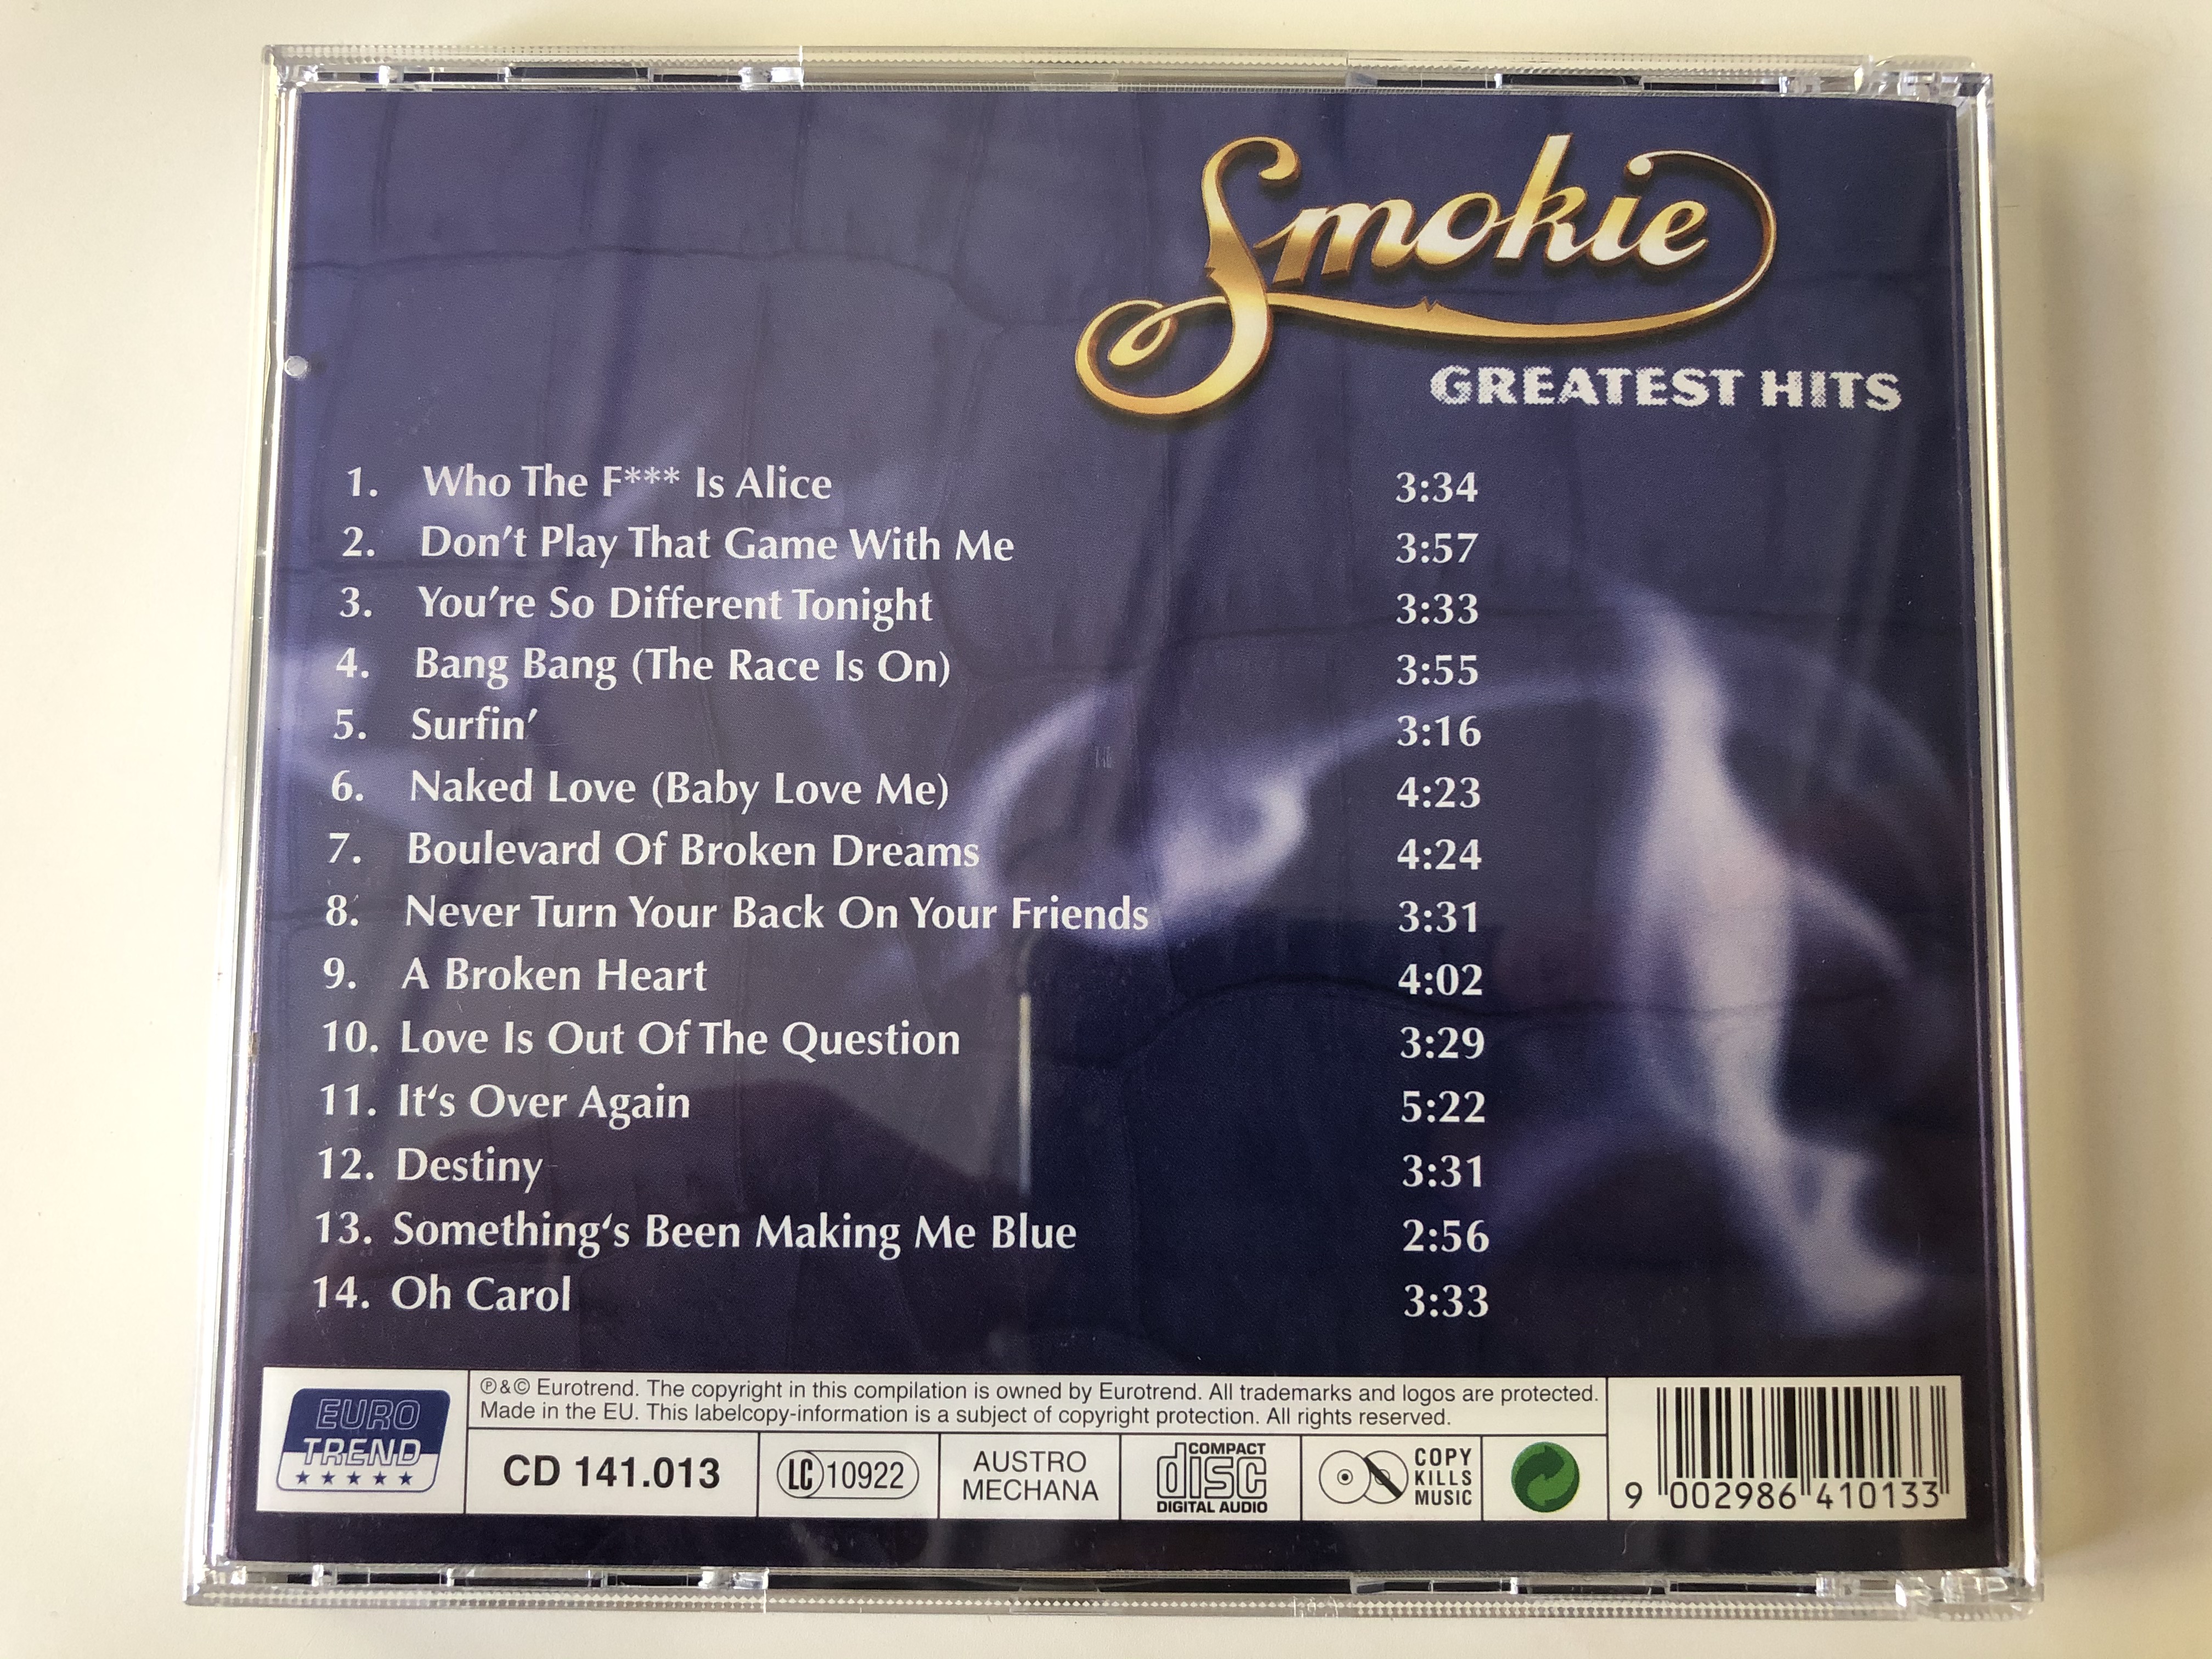 smokie-greatest-hits-cd-3-who-the-f-is-alice-don-t-play-that-game-with-me-you-re-so-different-tonight-bang-bang-surfin-a.m.o.-eurotrend-audio-cd-cd-141-4-.jpg